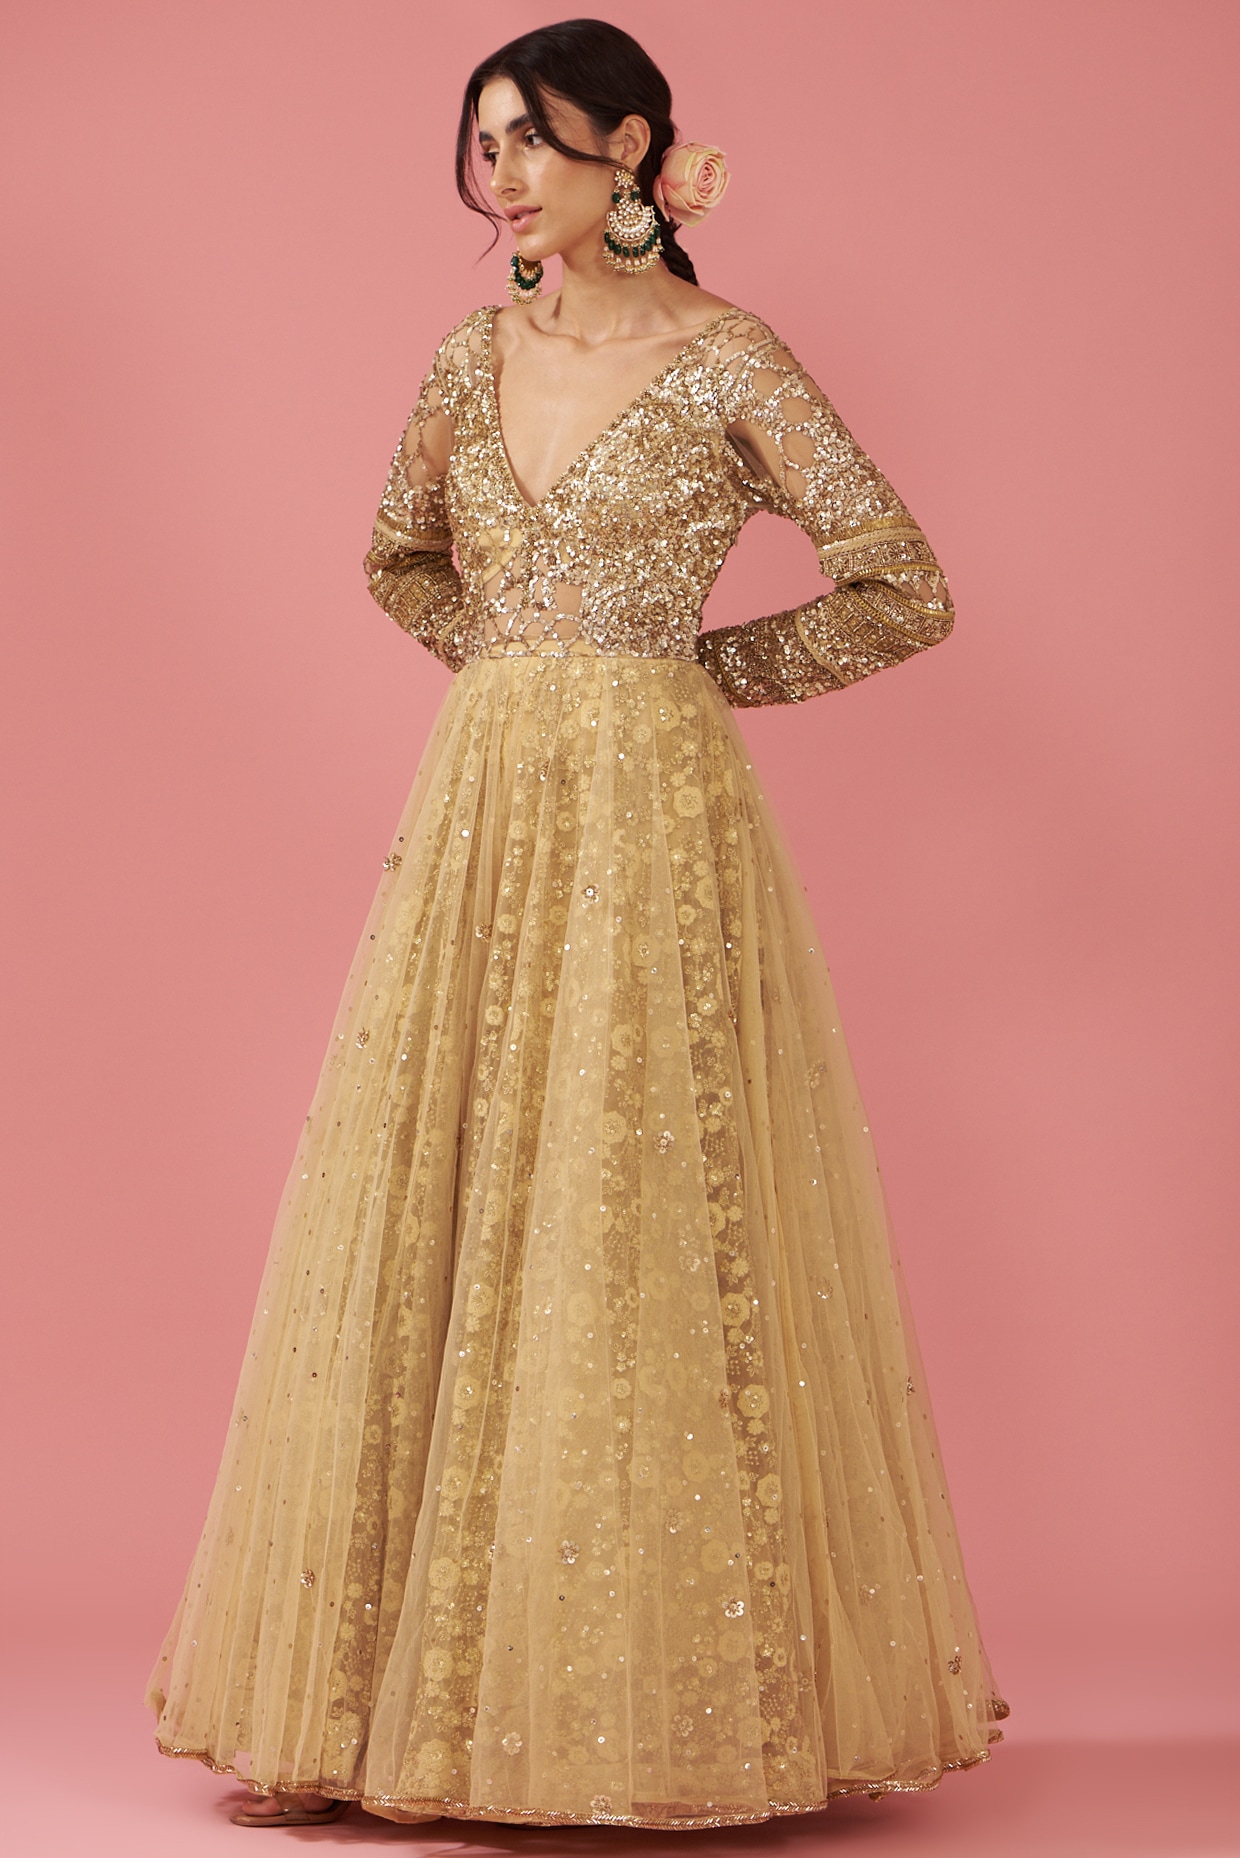 Queen in Rose Gold Gown and Accessories :: Behance